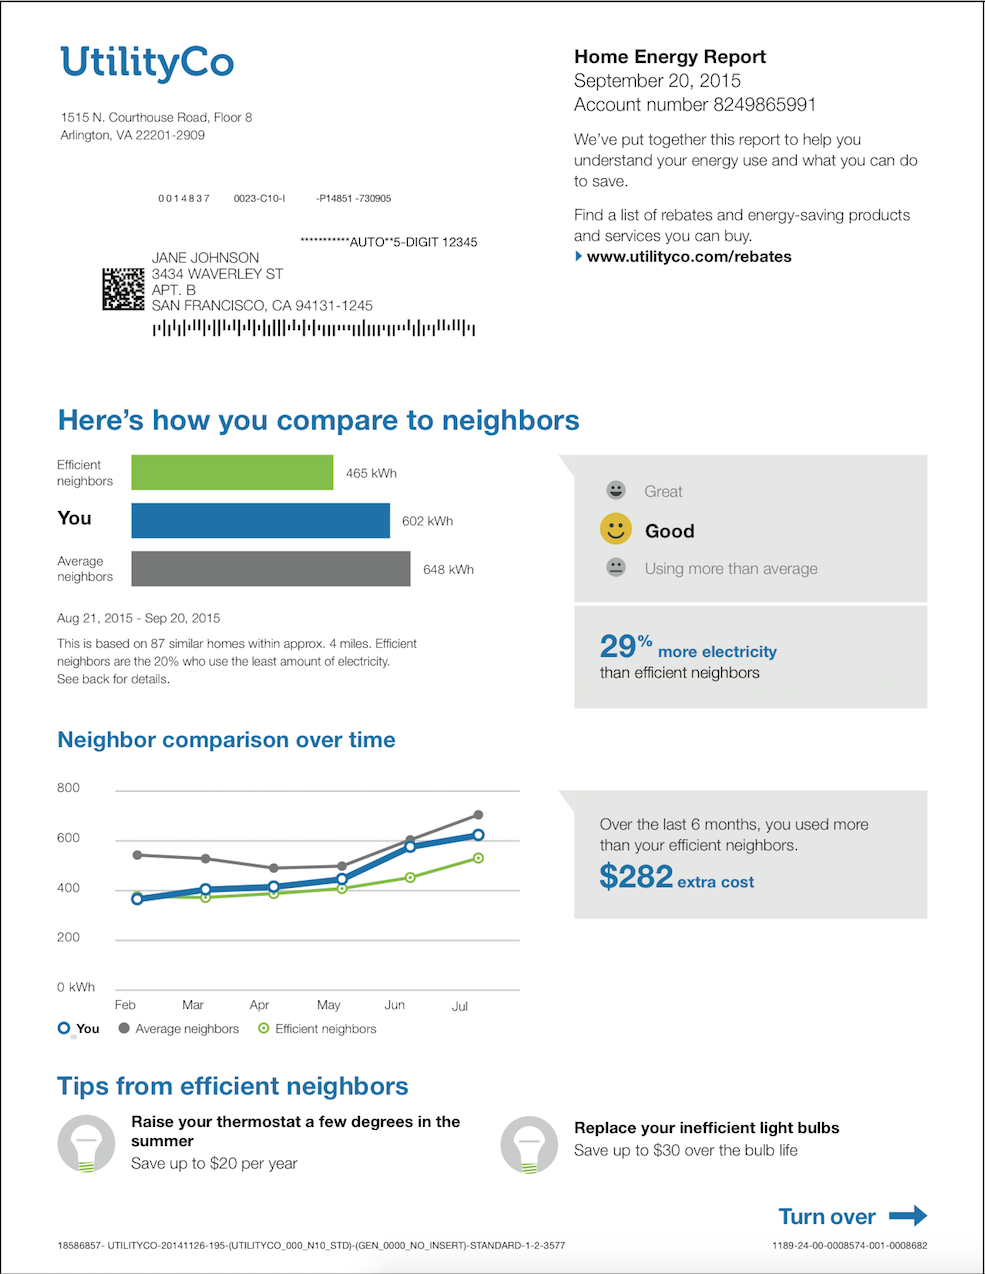 Image of the front page of the home energy report